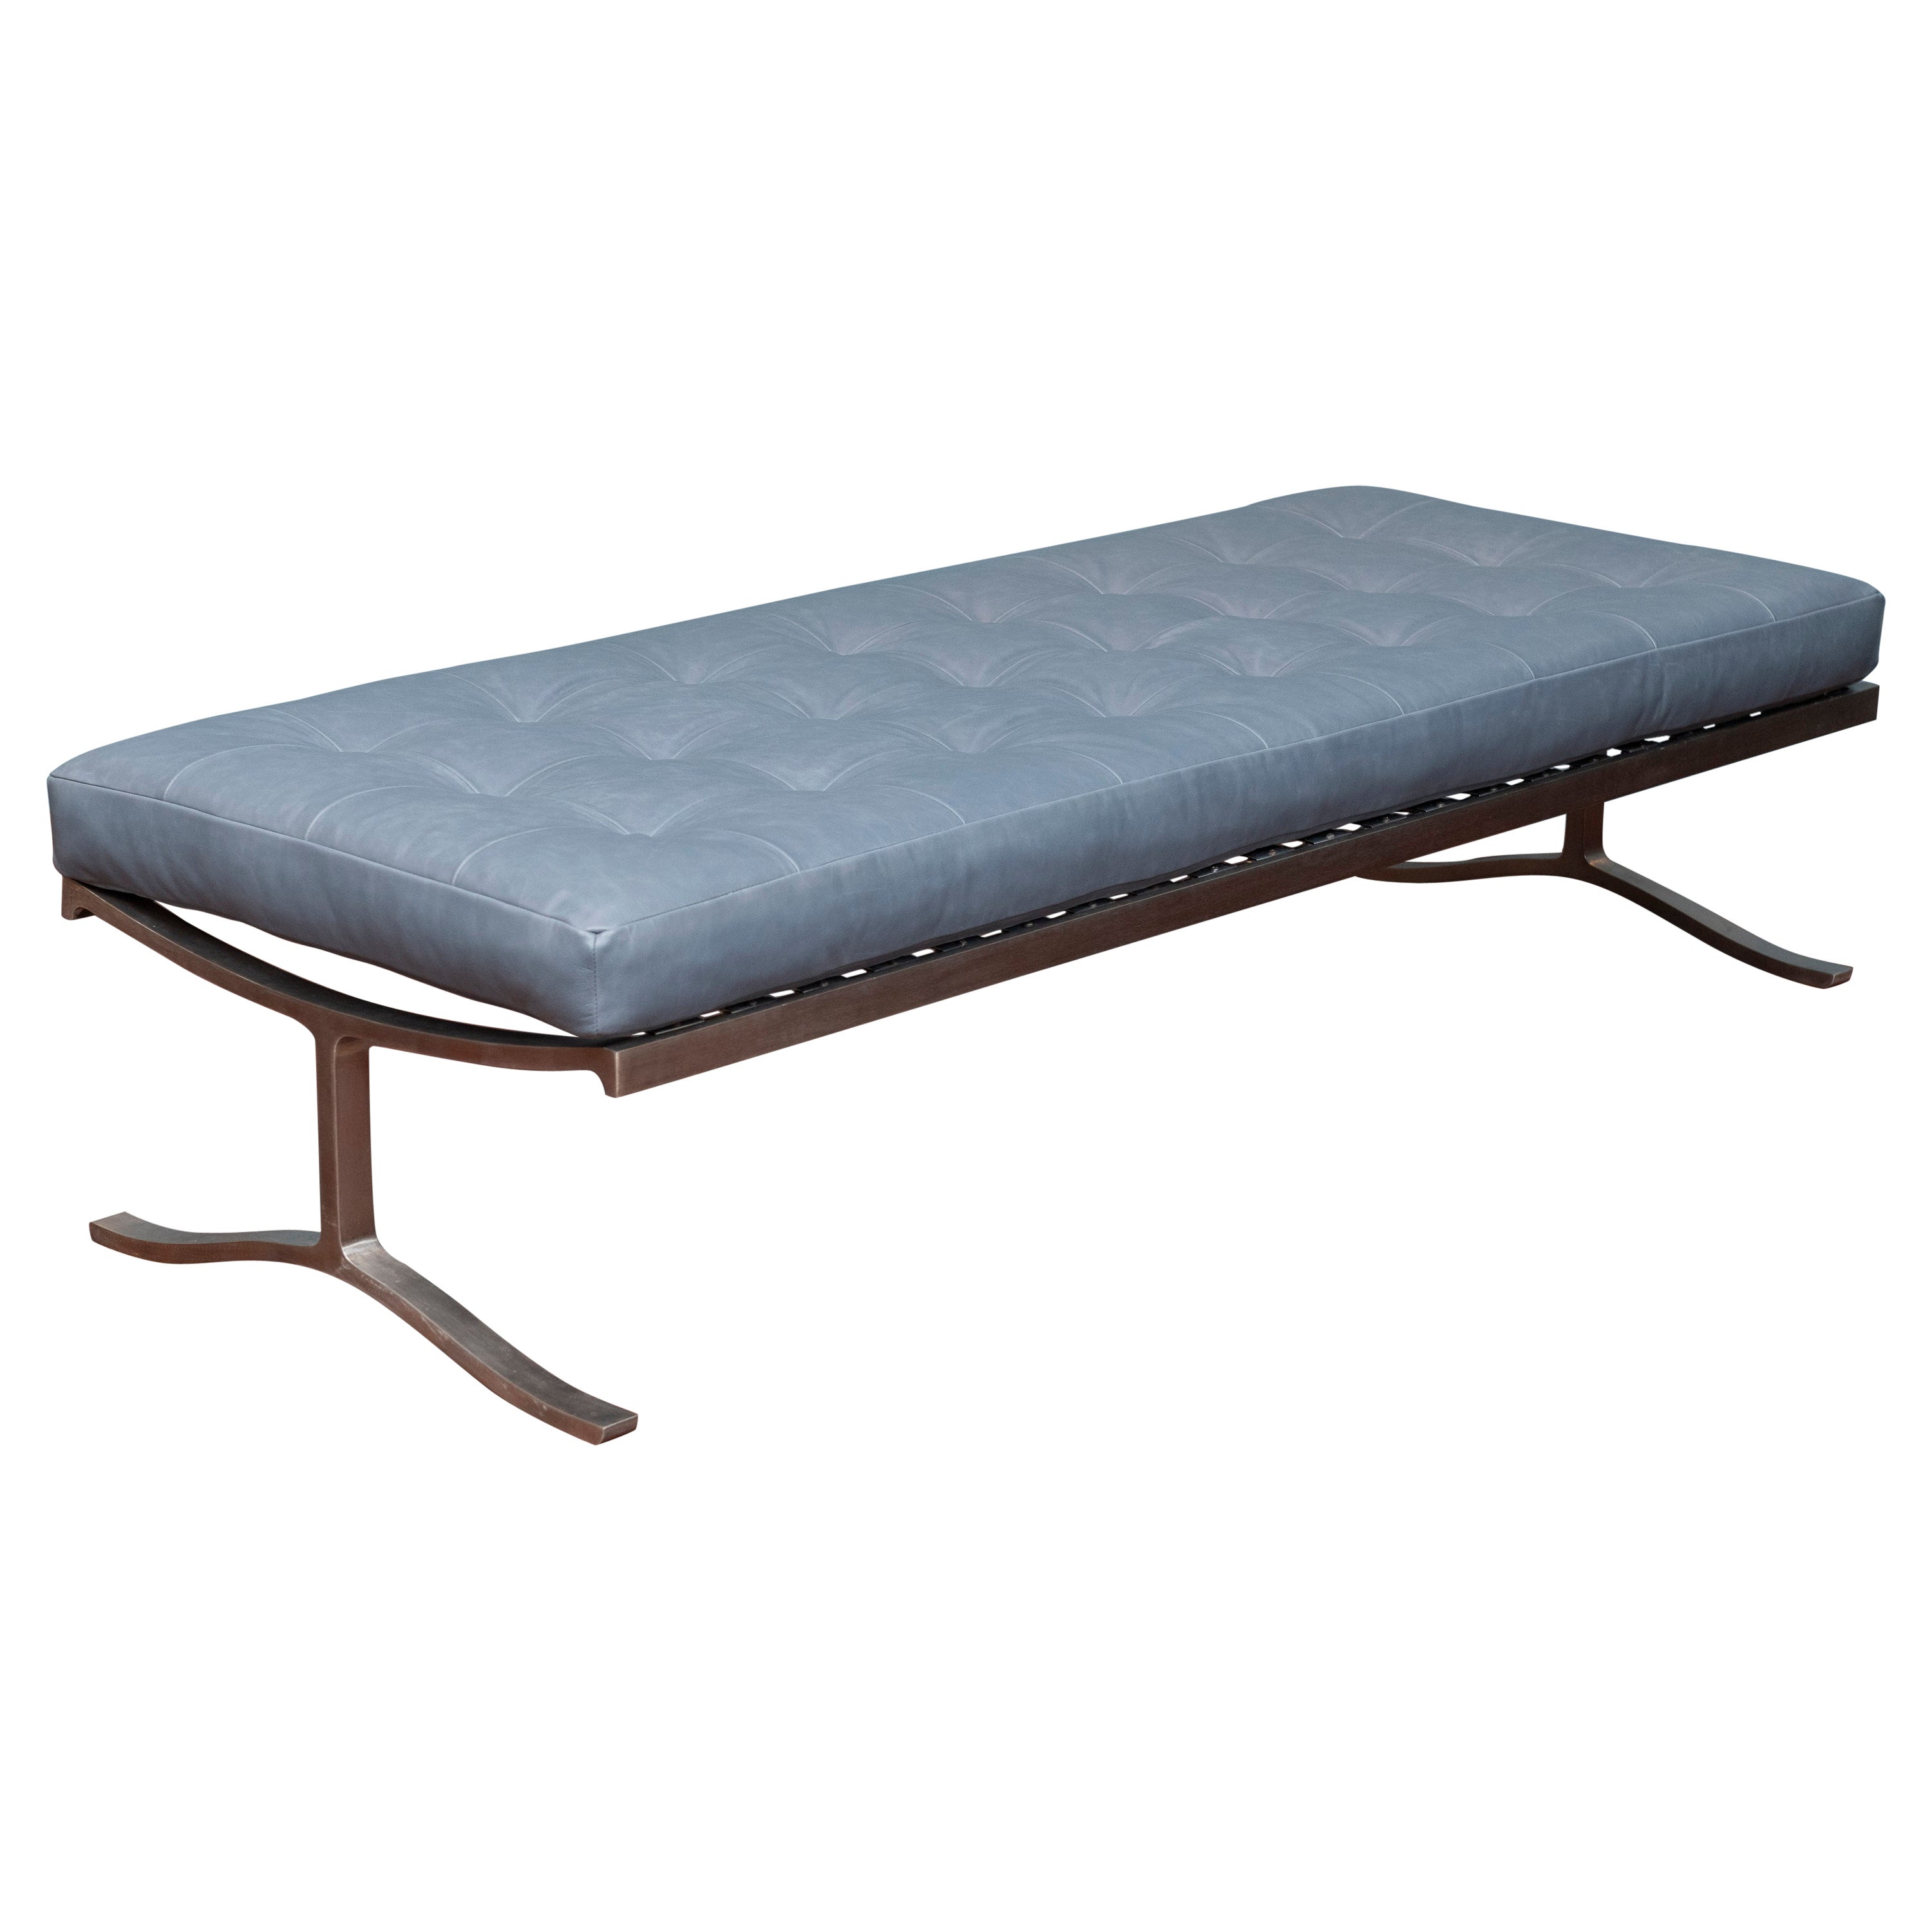 Nicos Zographos Stainless Steel Bench